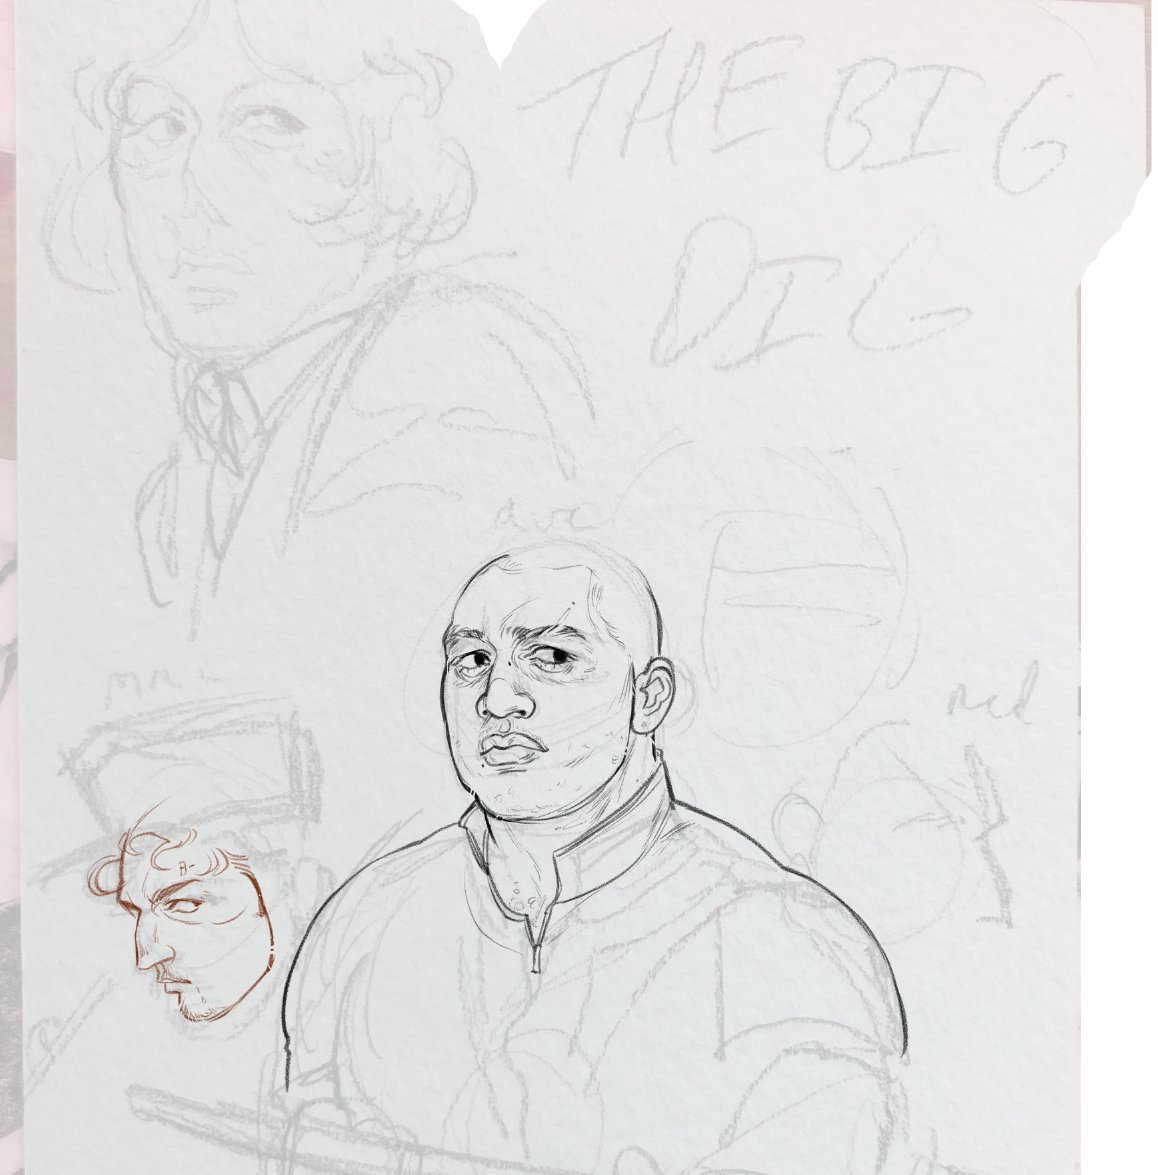 Happy sat! gonna be listening to music and working on this fo4 movie poster!
https://t.co/T4i8PGUznS 